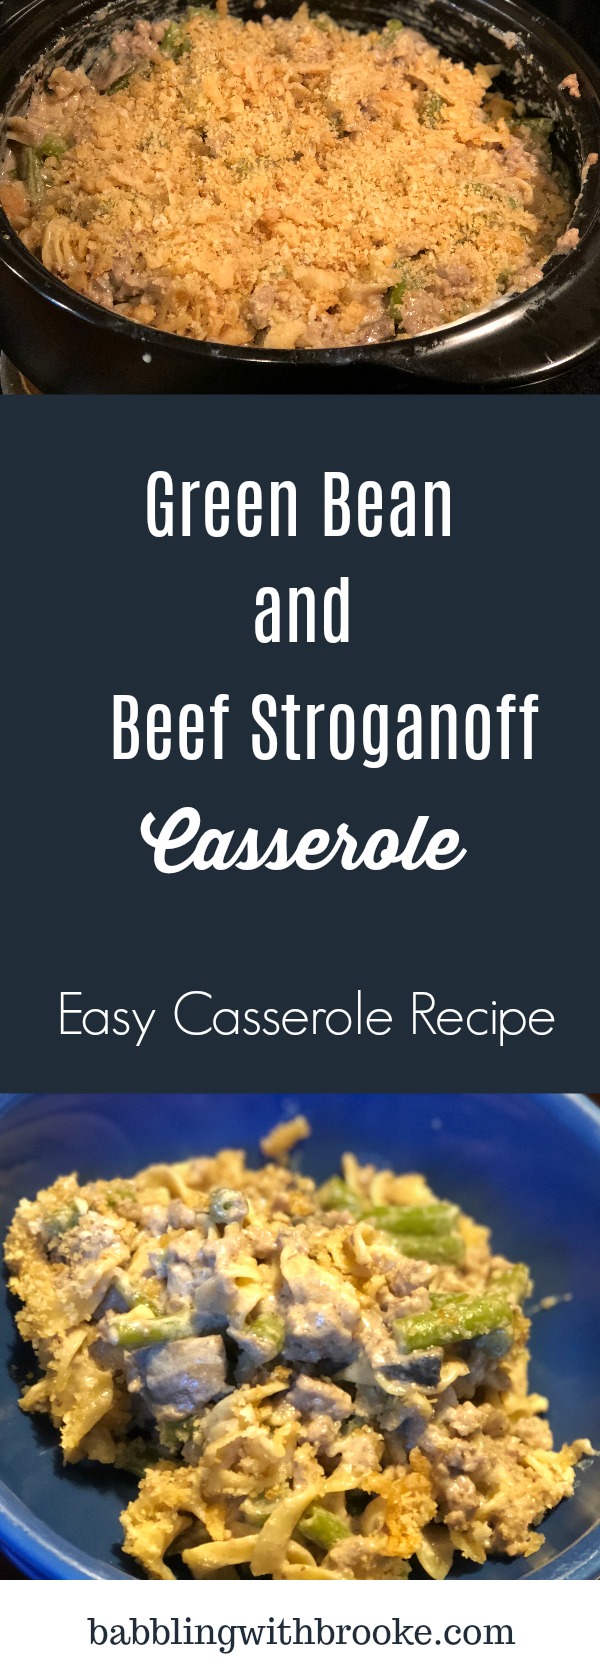 This delicious easy casserole is guaranteed to be a favorite with your family! This can be made in under 20 minutes which makes it a great dinner choice for busy weeknights! #easycasserolerecipe #easydinnerrecipe #casserole #stroganoff 